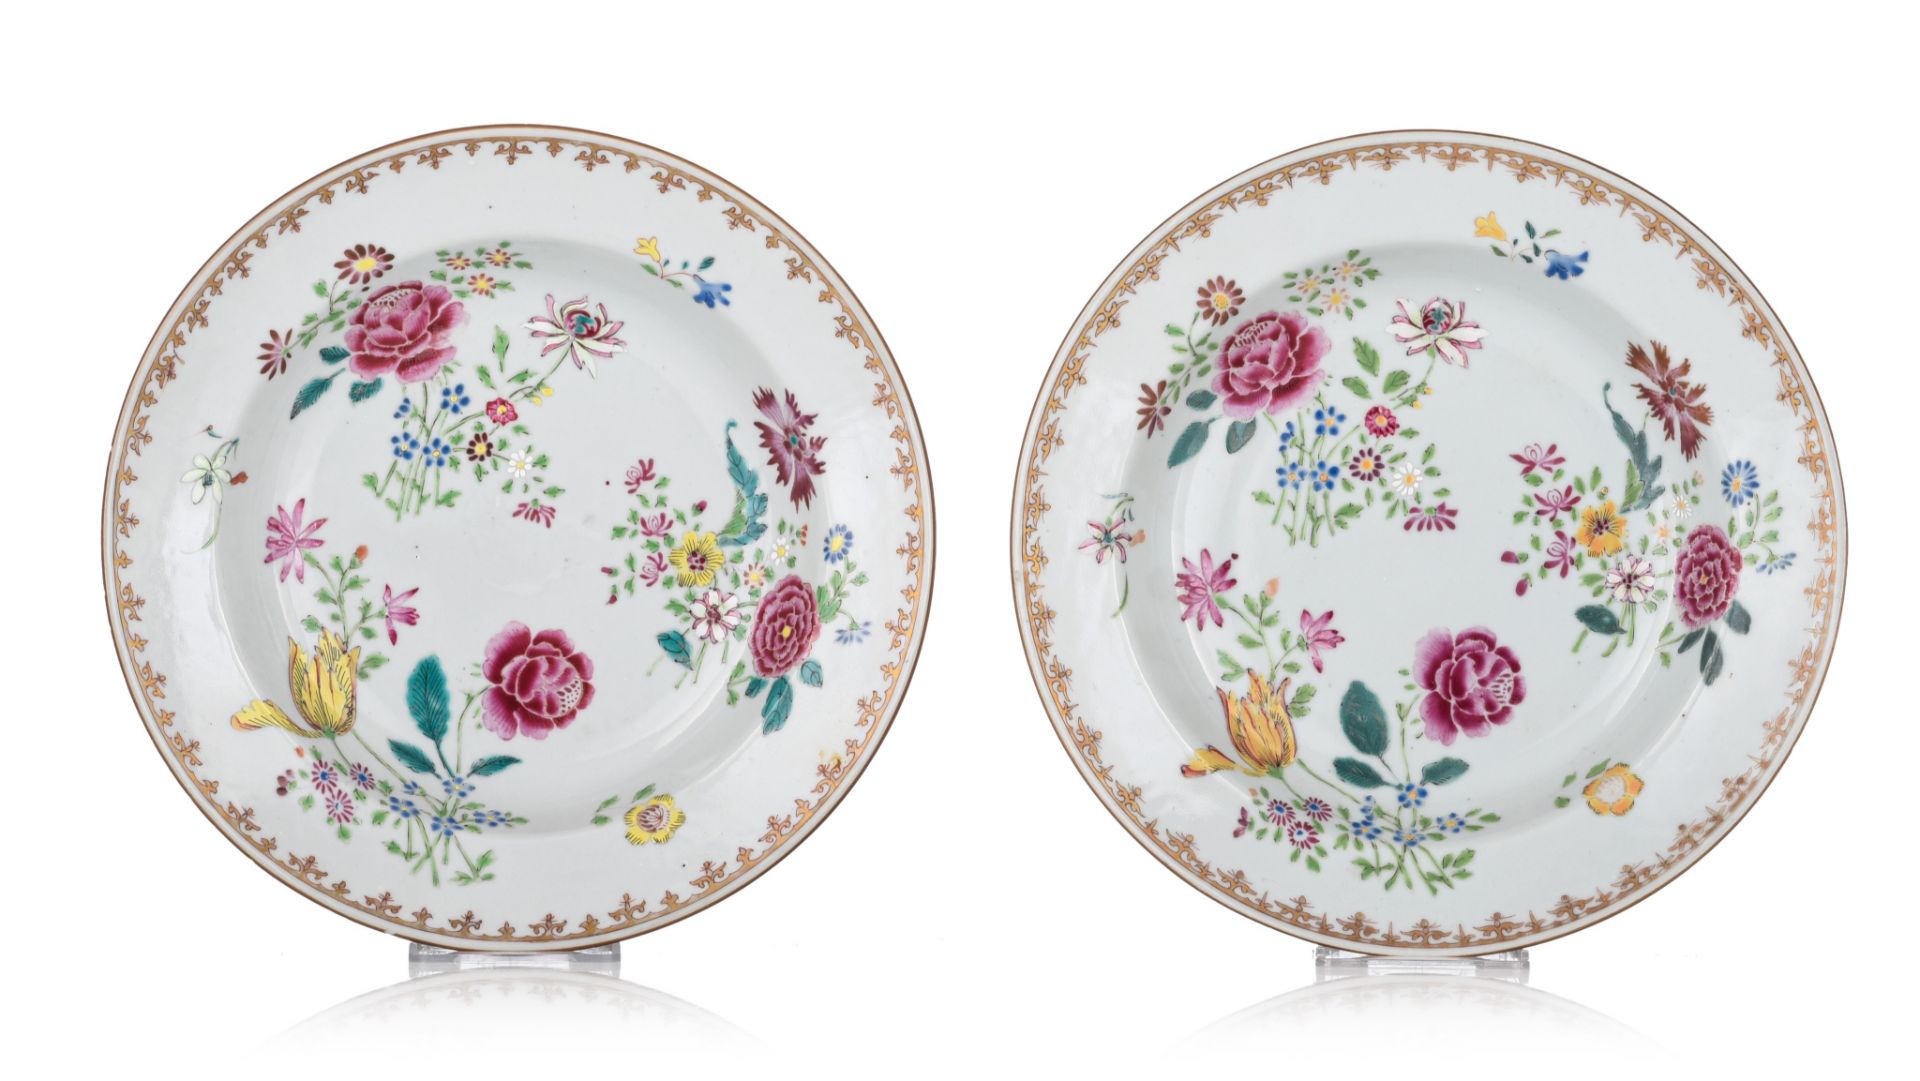 A collection of six Chinese famille rose export porcelain plates, 18thC, ¯ 23,5 cm - Image 2 of 10